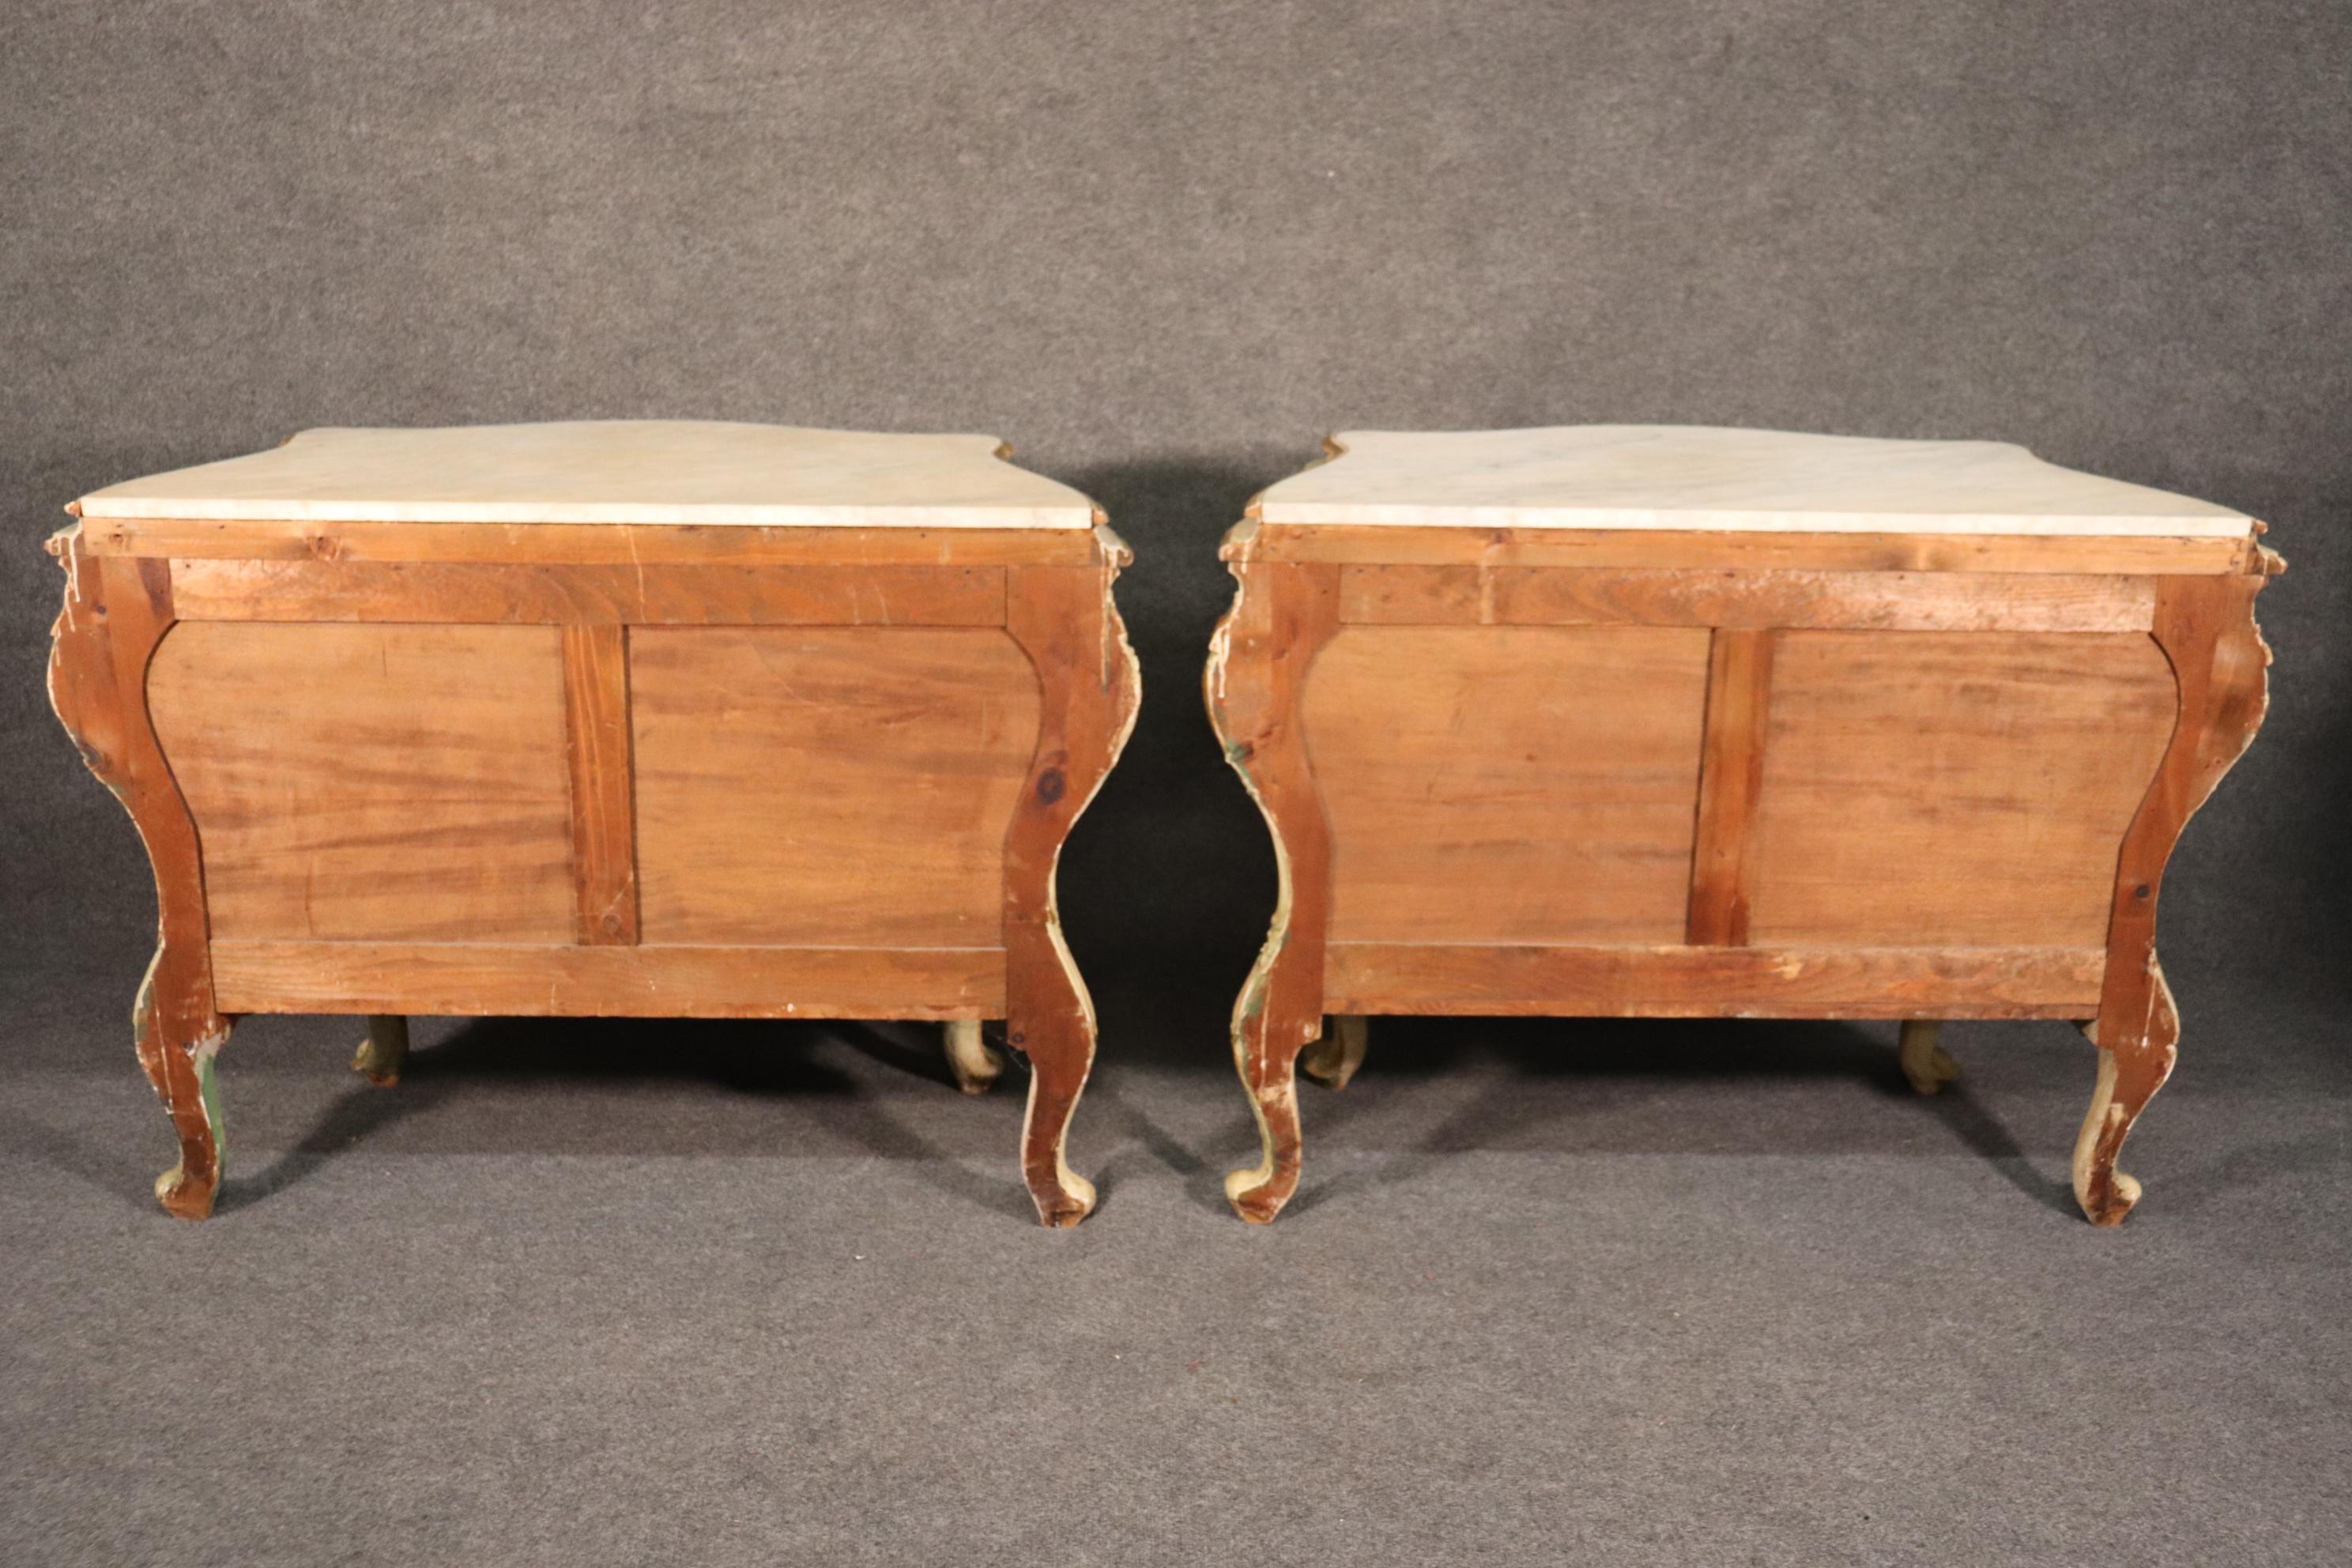 Pair Fine Large Italian Painted Marble Top Rococo Commodes Dressers 1930s Era For Sale 3